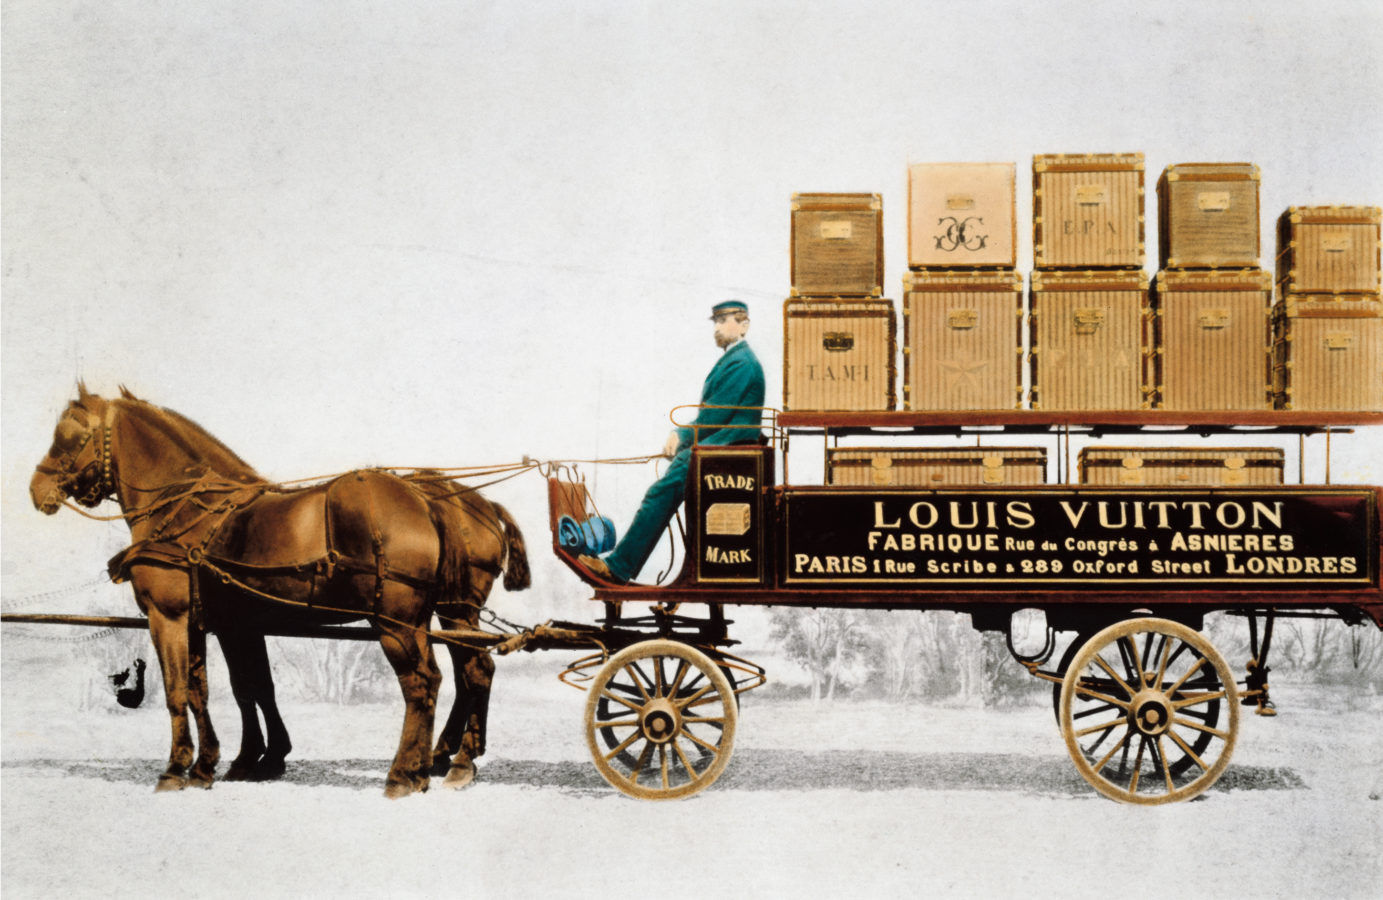 The amazing 200 years Of Louis Vuitton: From trunk-maker to the